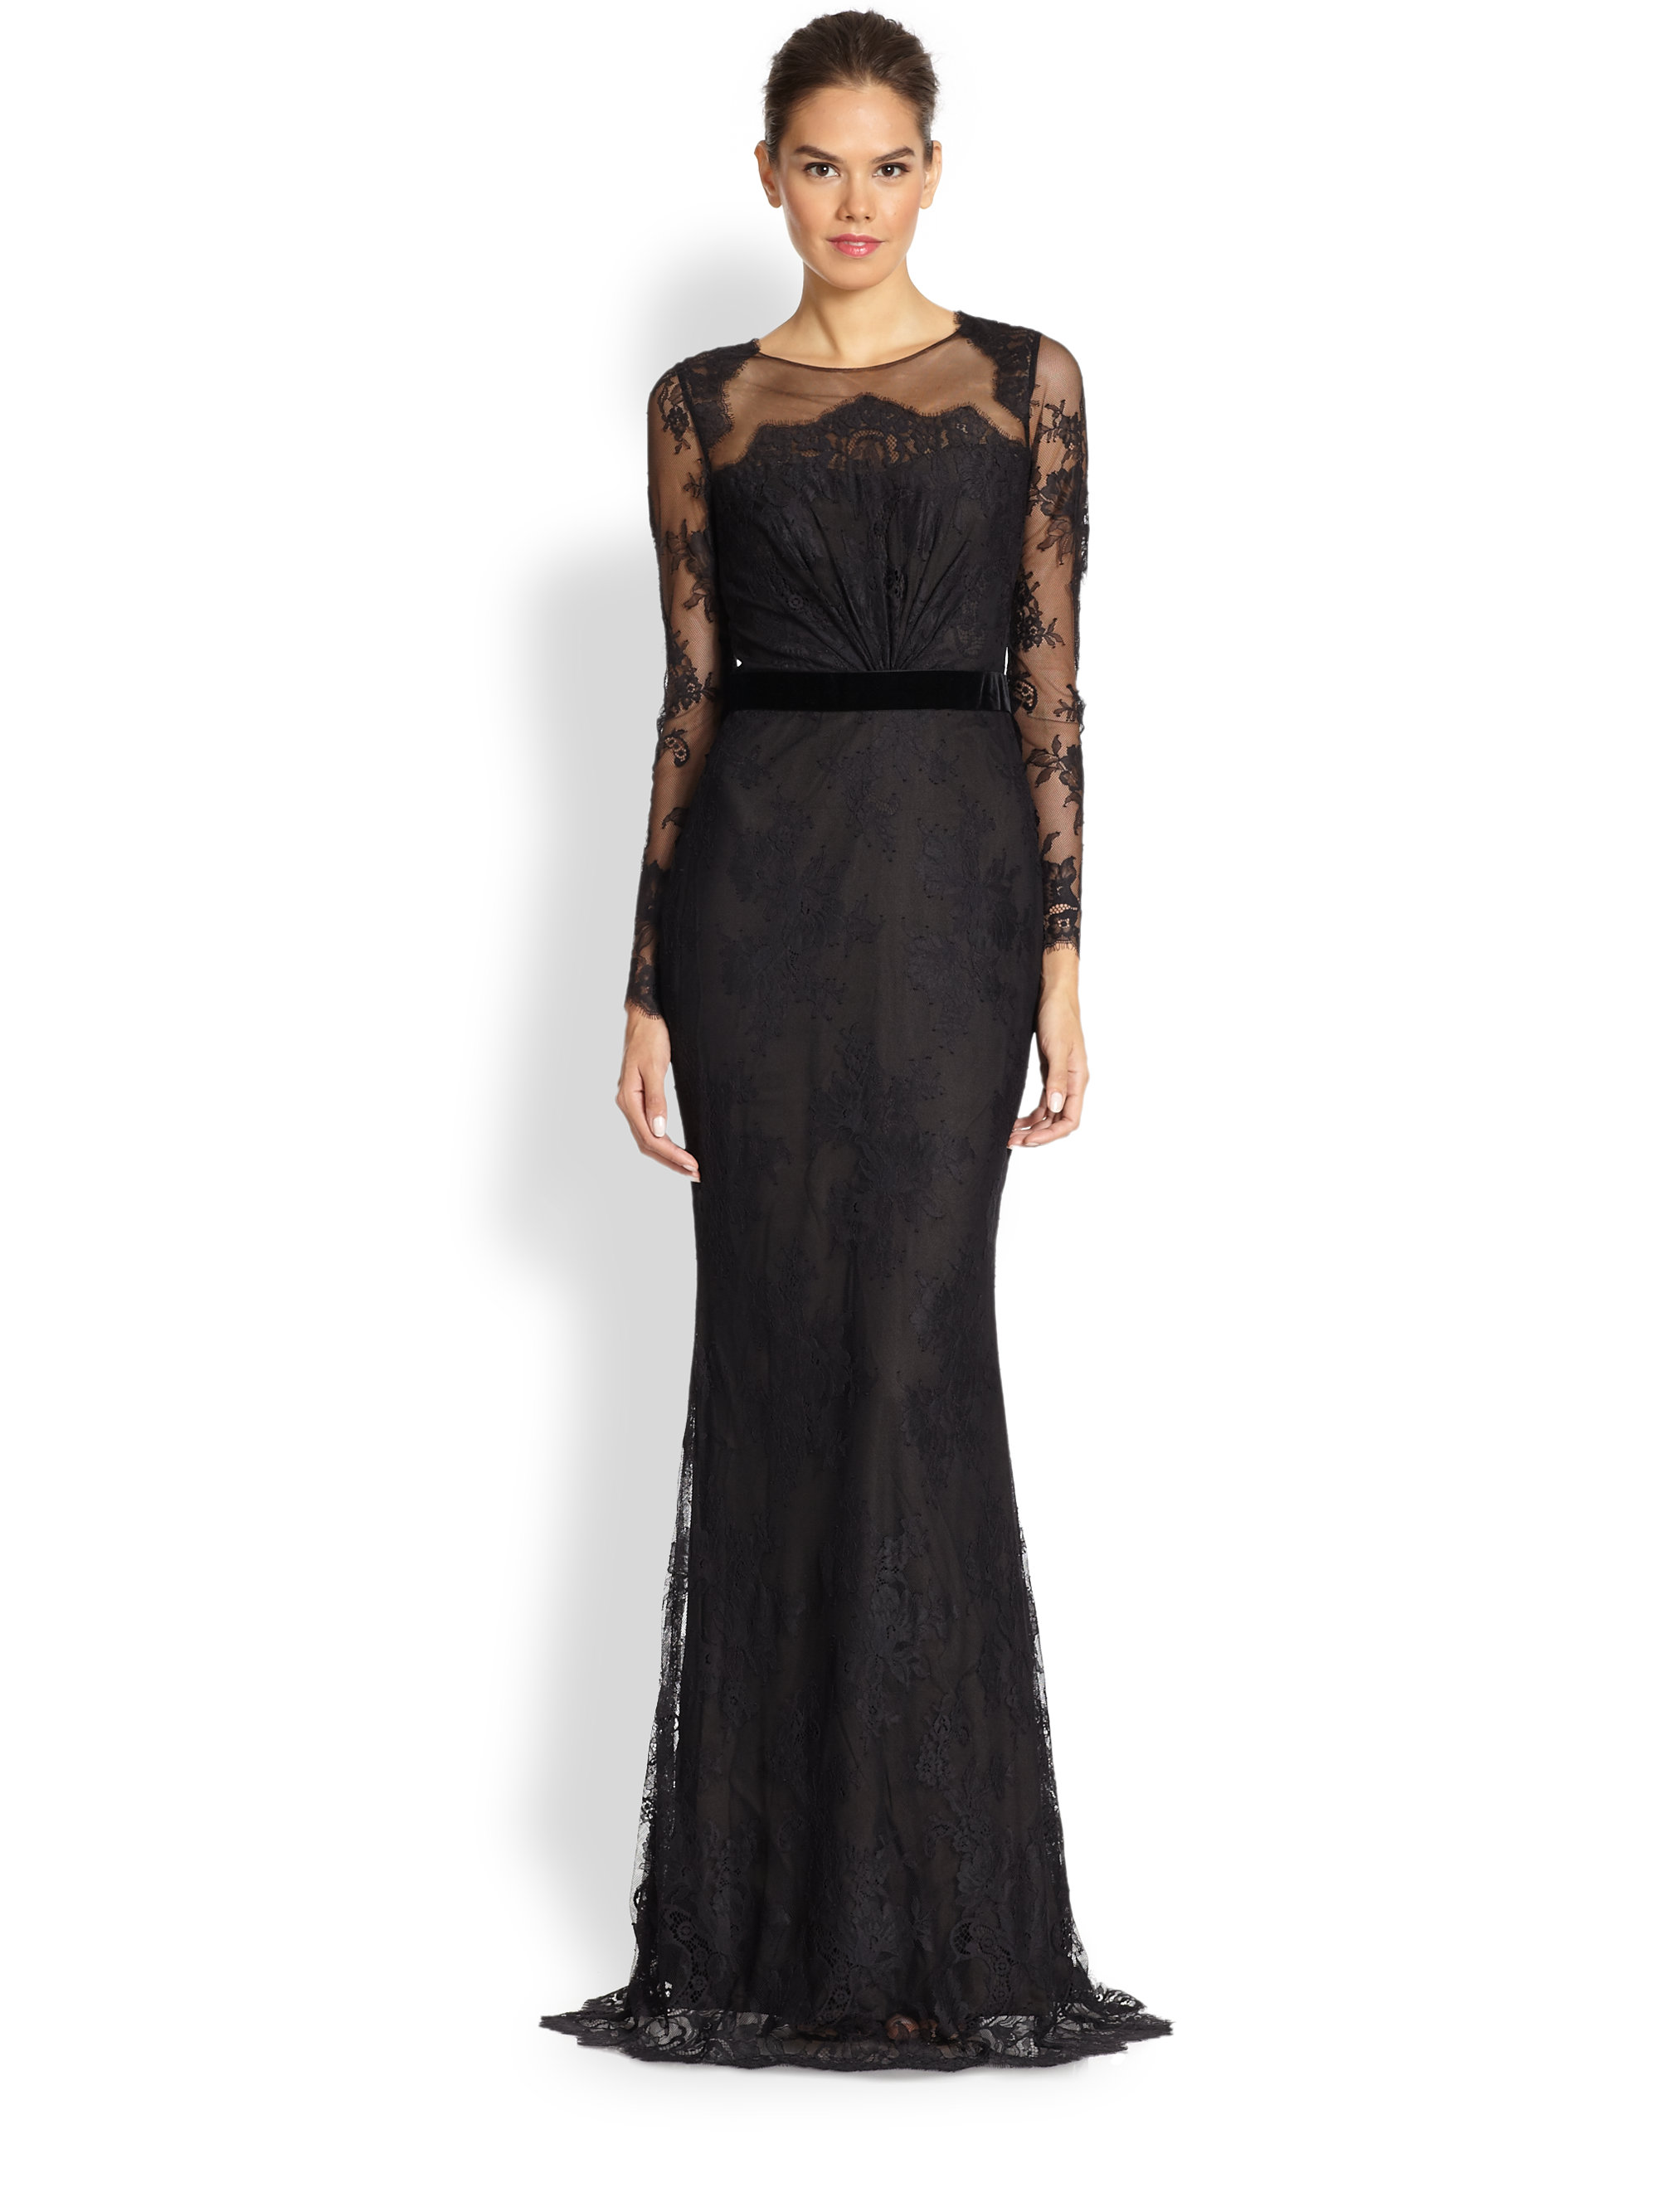 Lyst - Notte By Marchesa Floral Lace Gown in Black